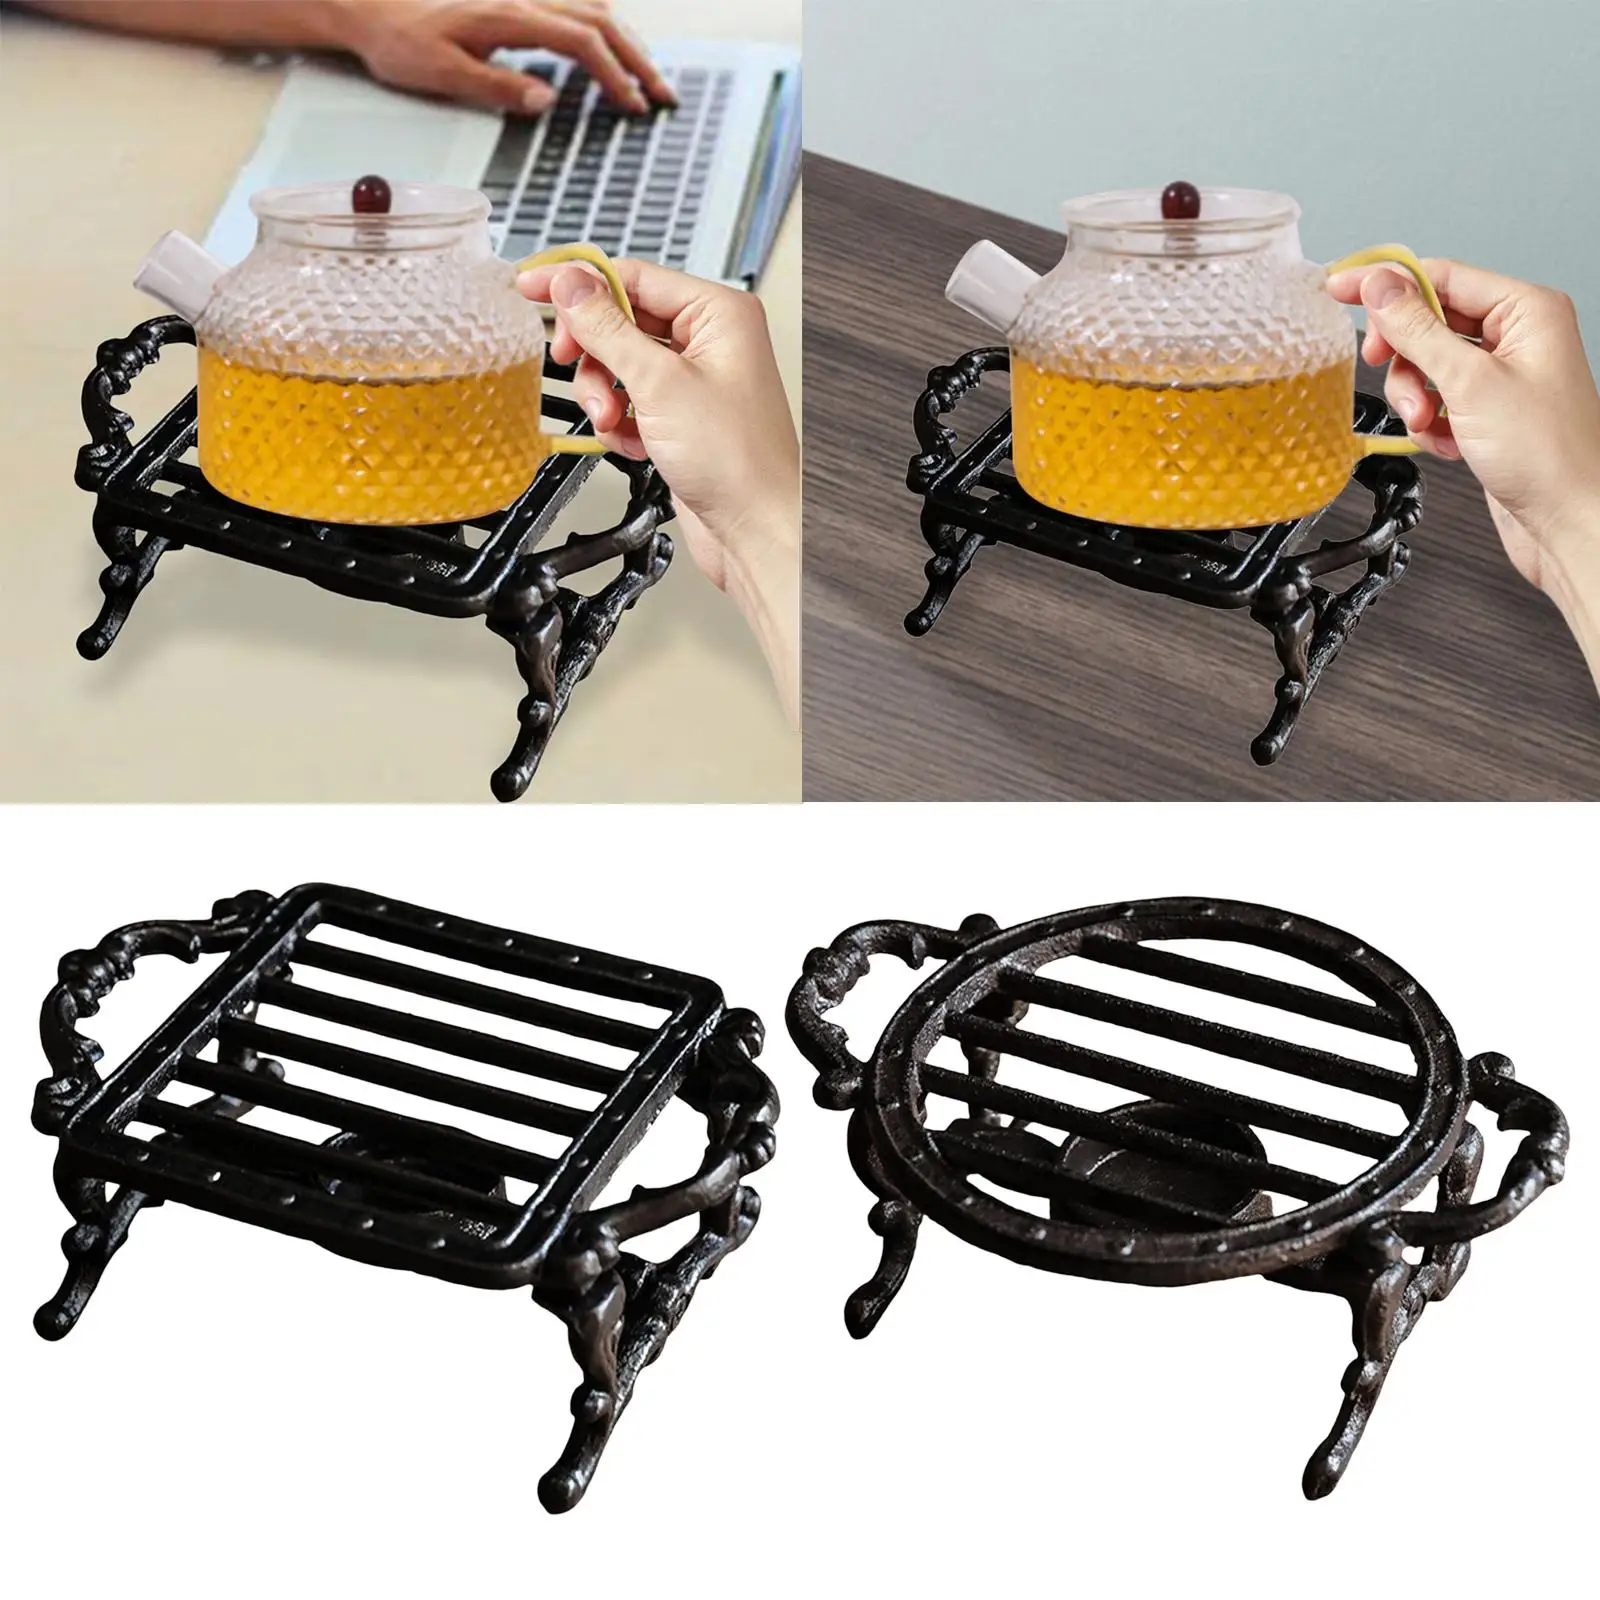 Teapot Warmer Holder Decorative Candle Holder Stands Insulation Base Teapot Warmer for Camping Travel Heatcoffee Milk or Tea